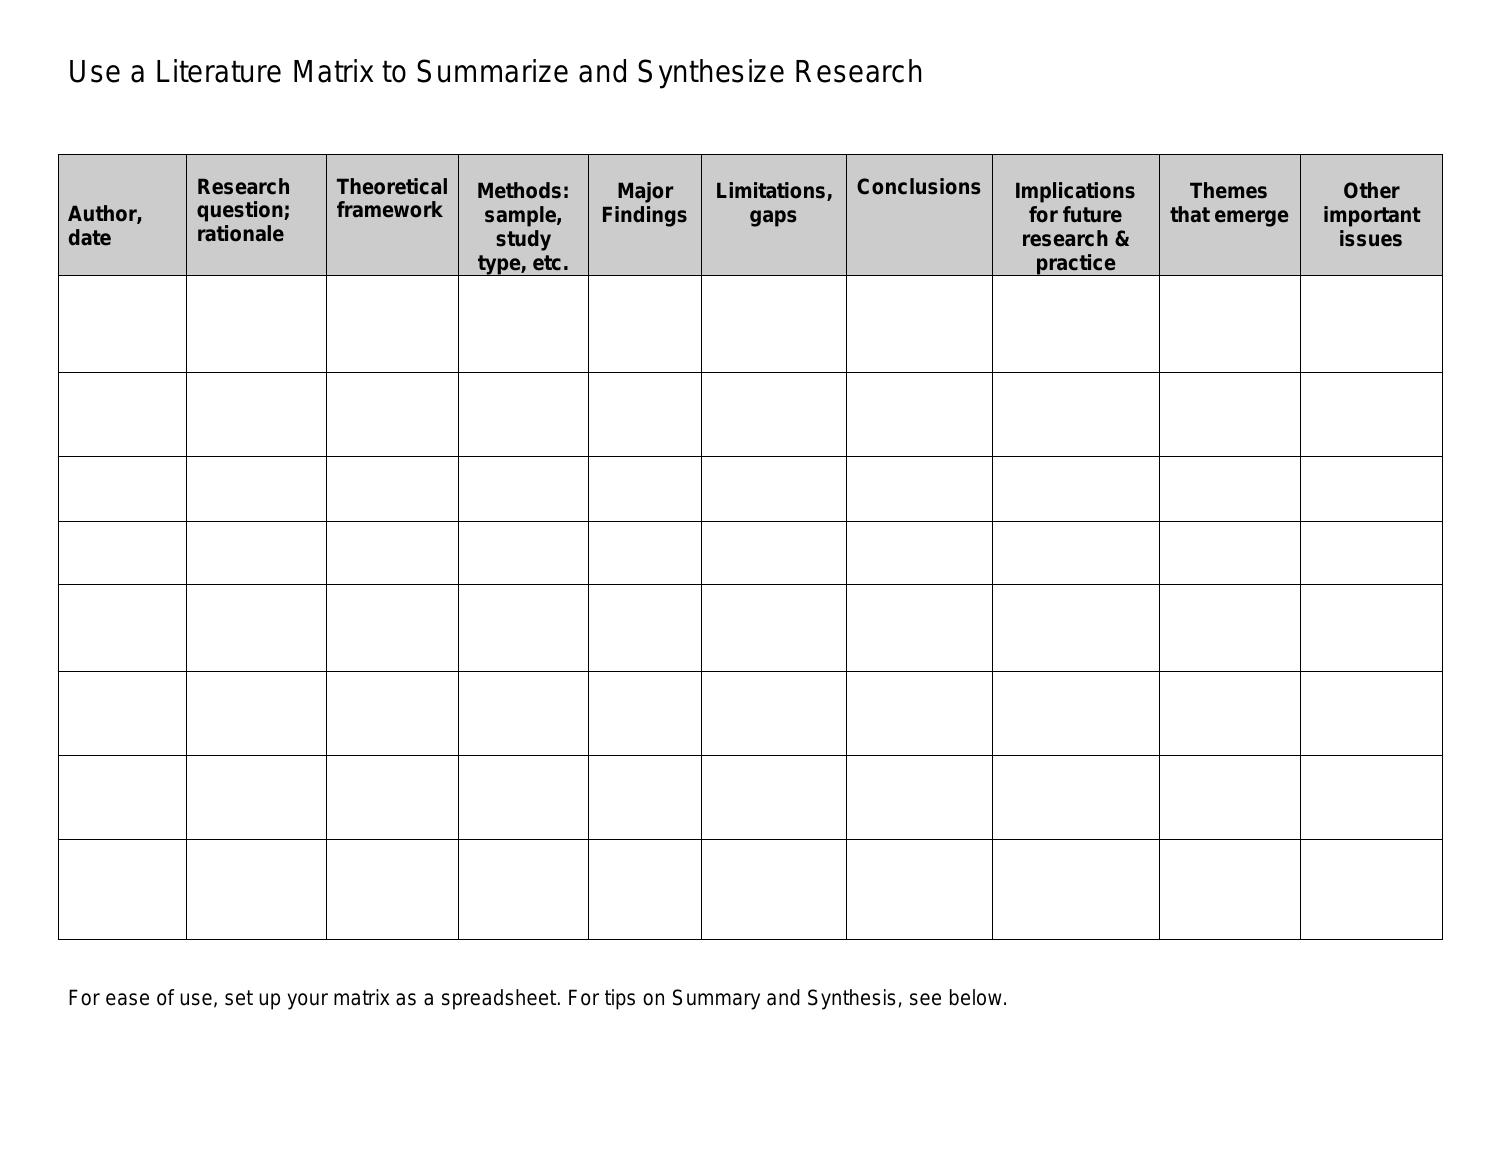 Use Literature Matrix synthesize Research pdf DocDroid